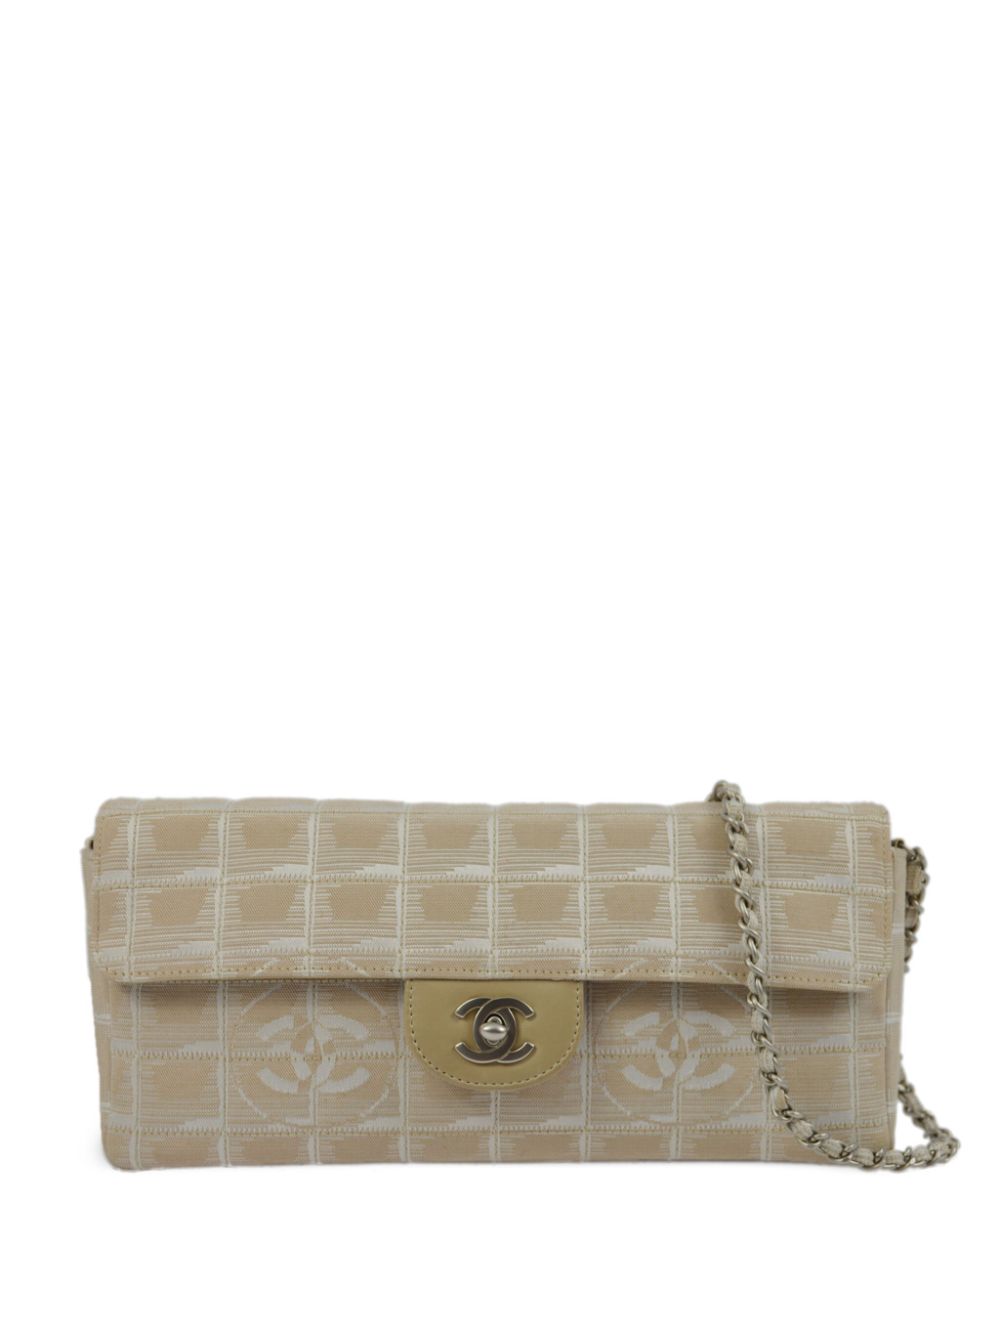 CHANEL Pre-Owned 2002 East West Flap shoulder bag - Neutrals von CHANEL Pre-Owned